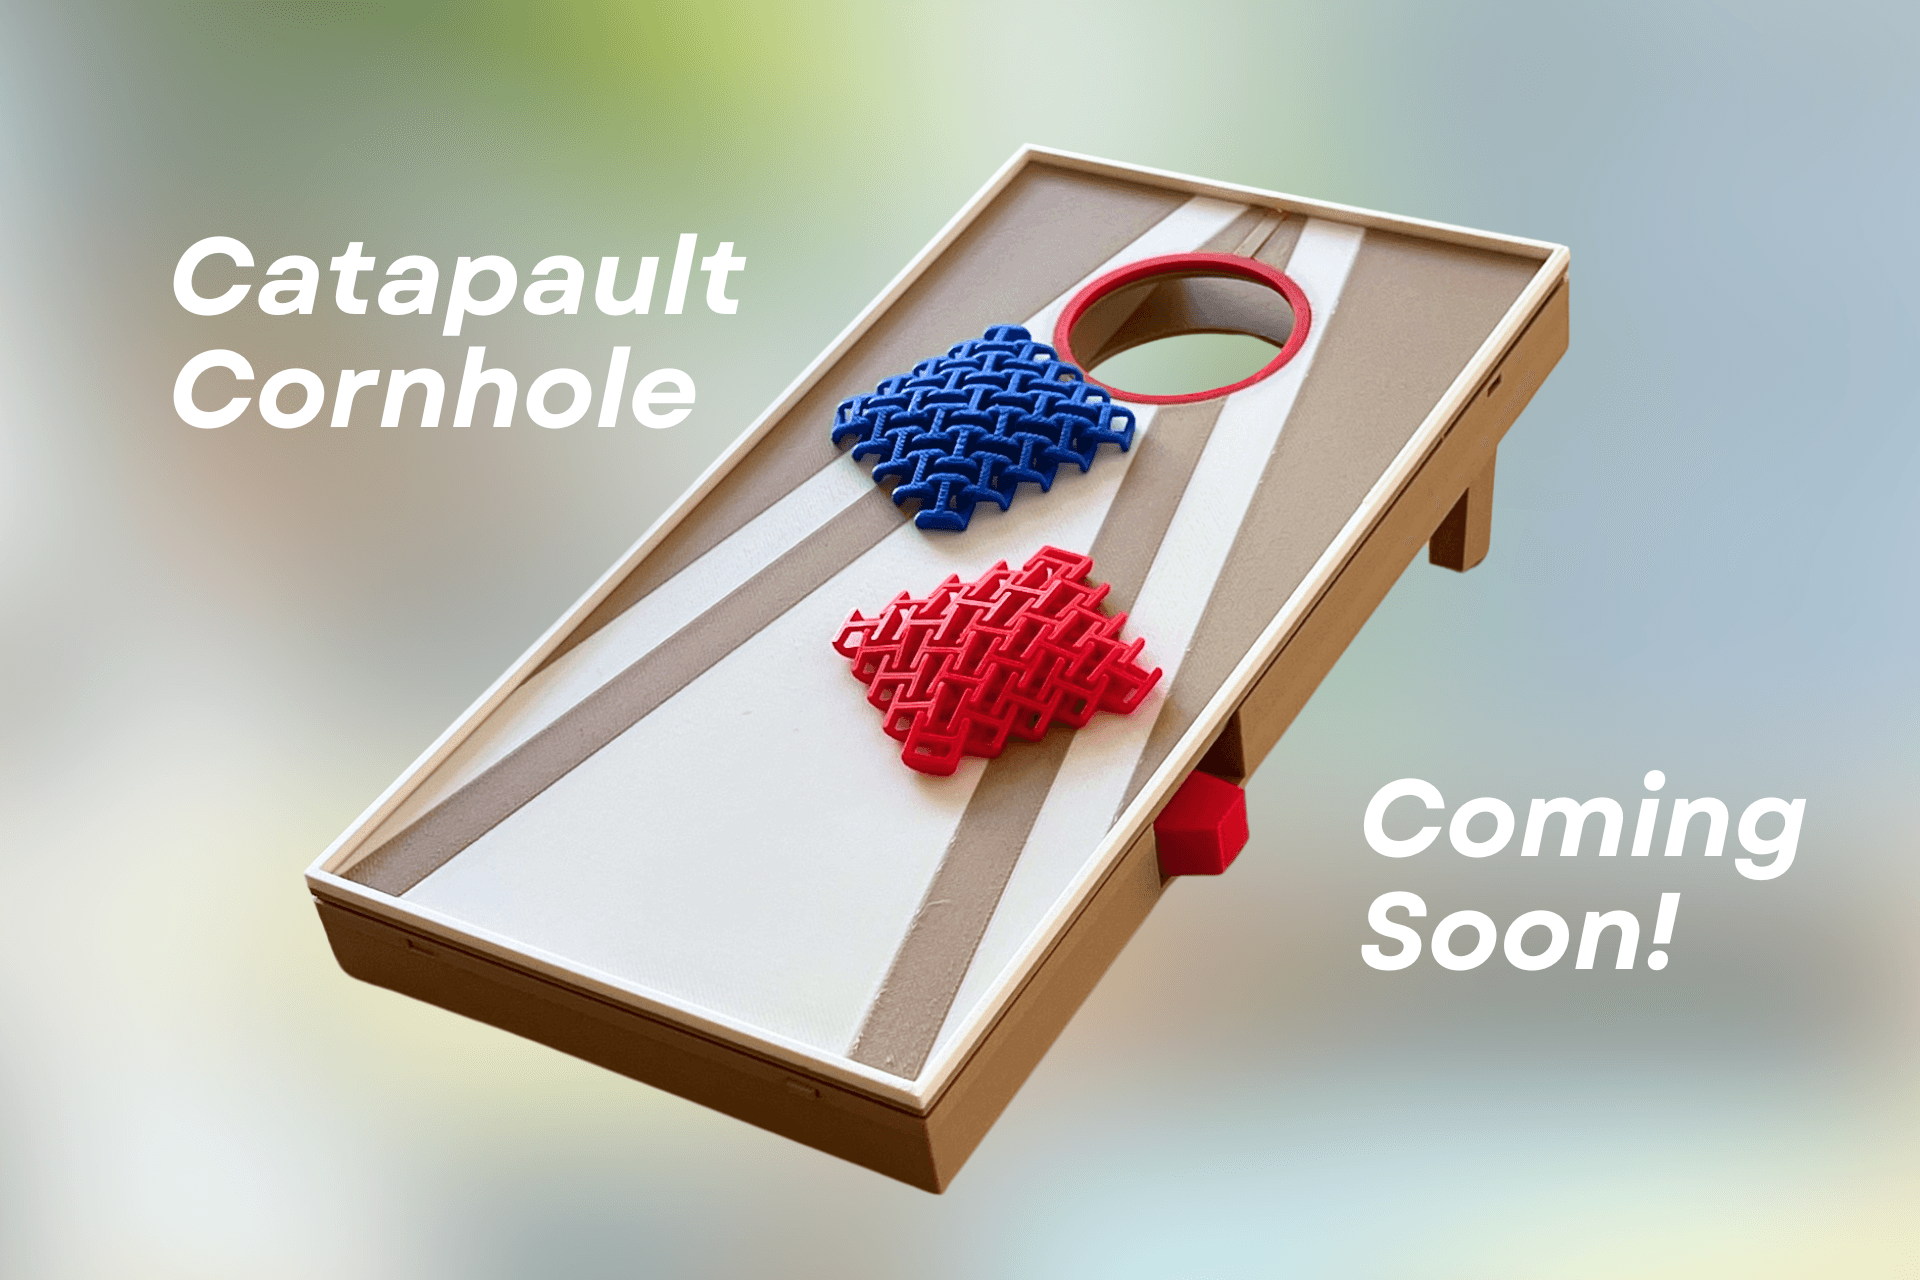 Cornhole with a Catapult? 
Weekly Update: 7-15